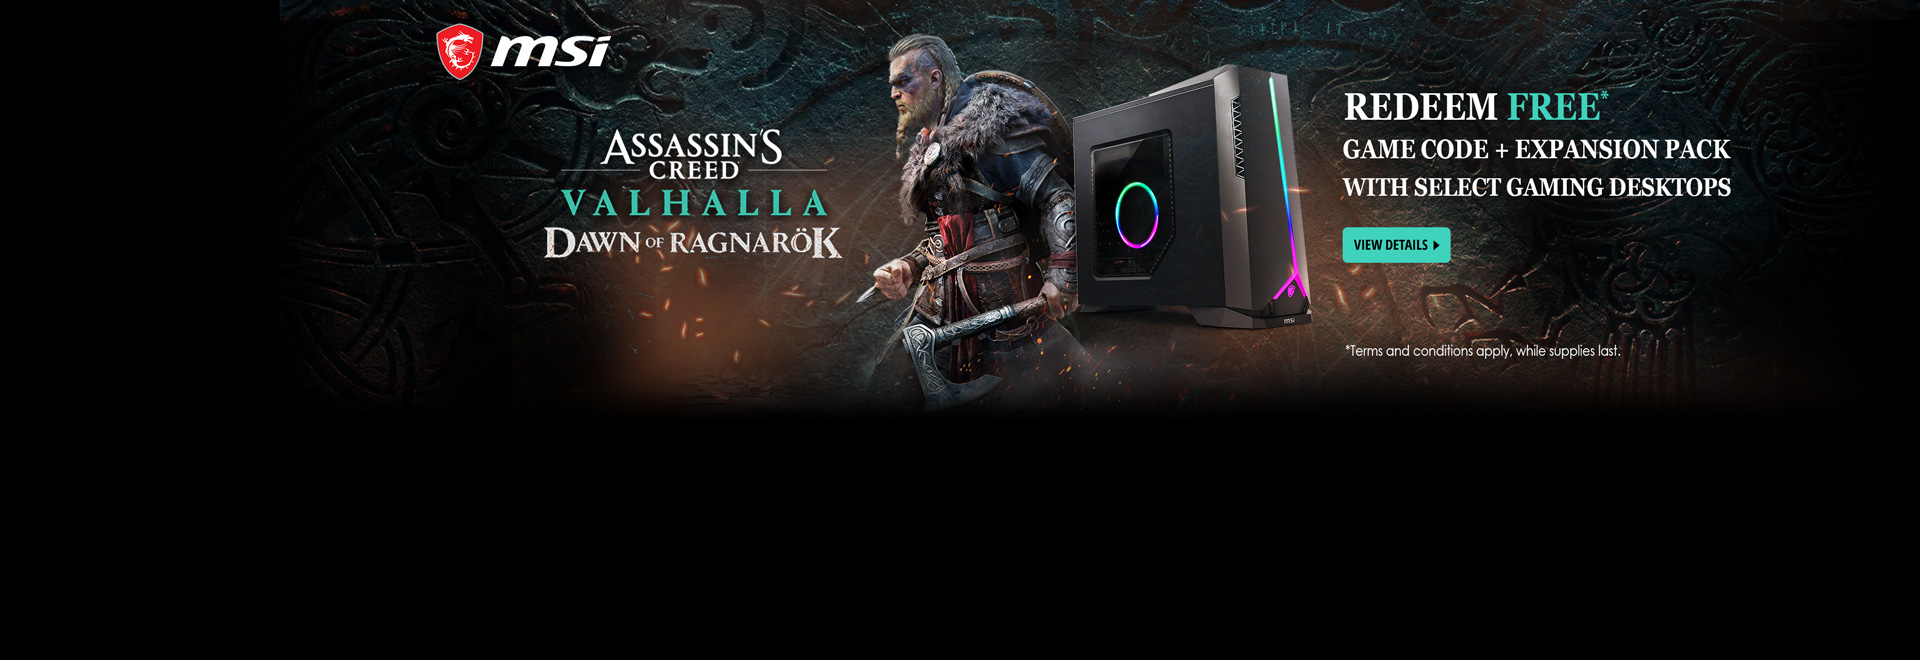 Redeem Free Game Code + Expansion Pack With Select Gaming Desktops